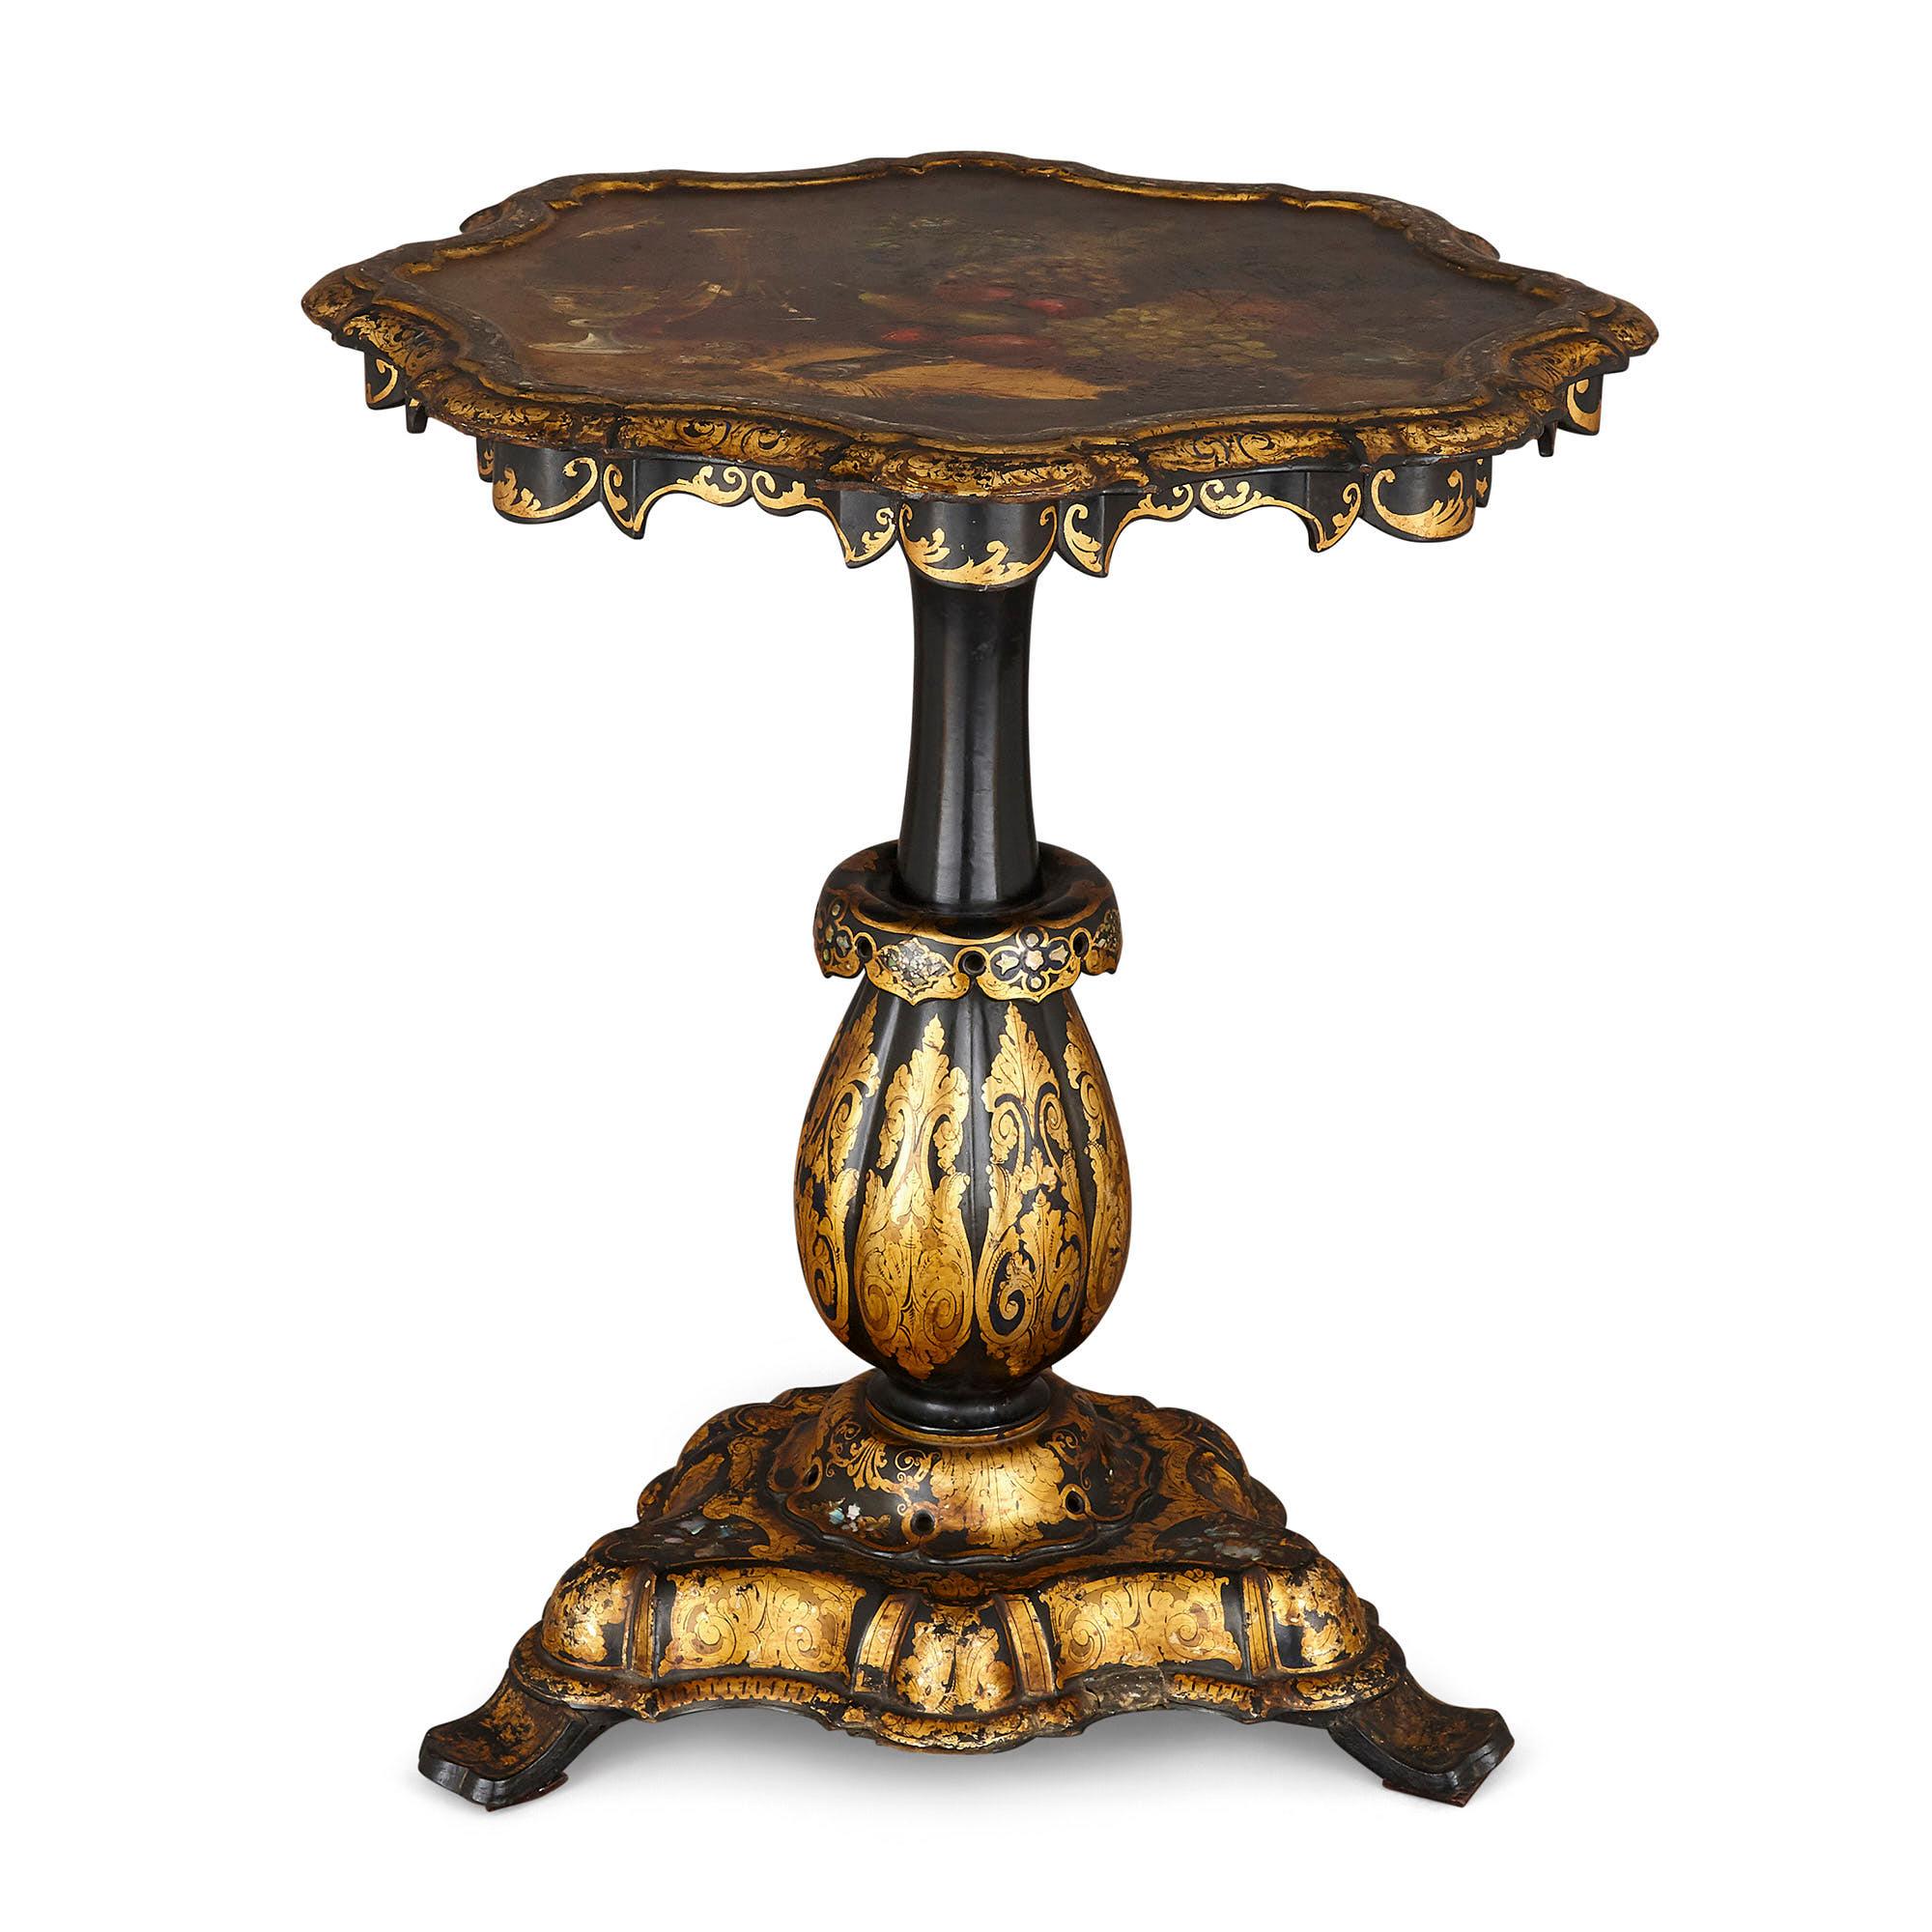 Jennens & Bettridge ebonised wood papier mâché side table
English, c. 1840
Measures: Height 72cm, diameter 63cm

The table surface has been japanned, meaning that it has been applied with layers of thick black varnish in imitation of Japanese